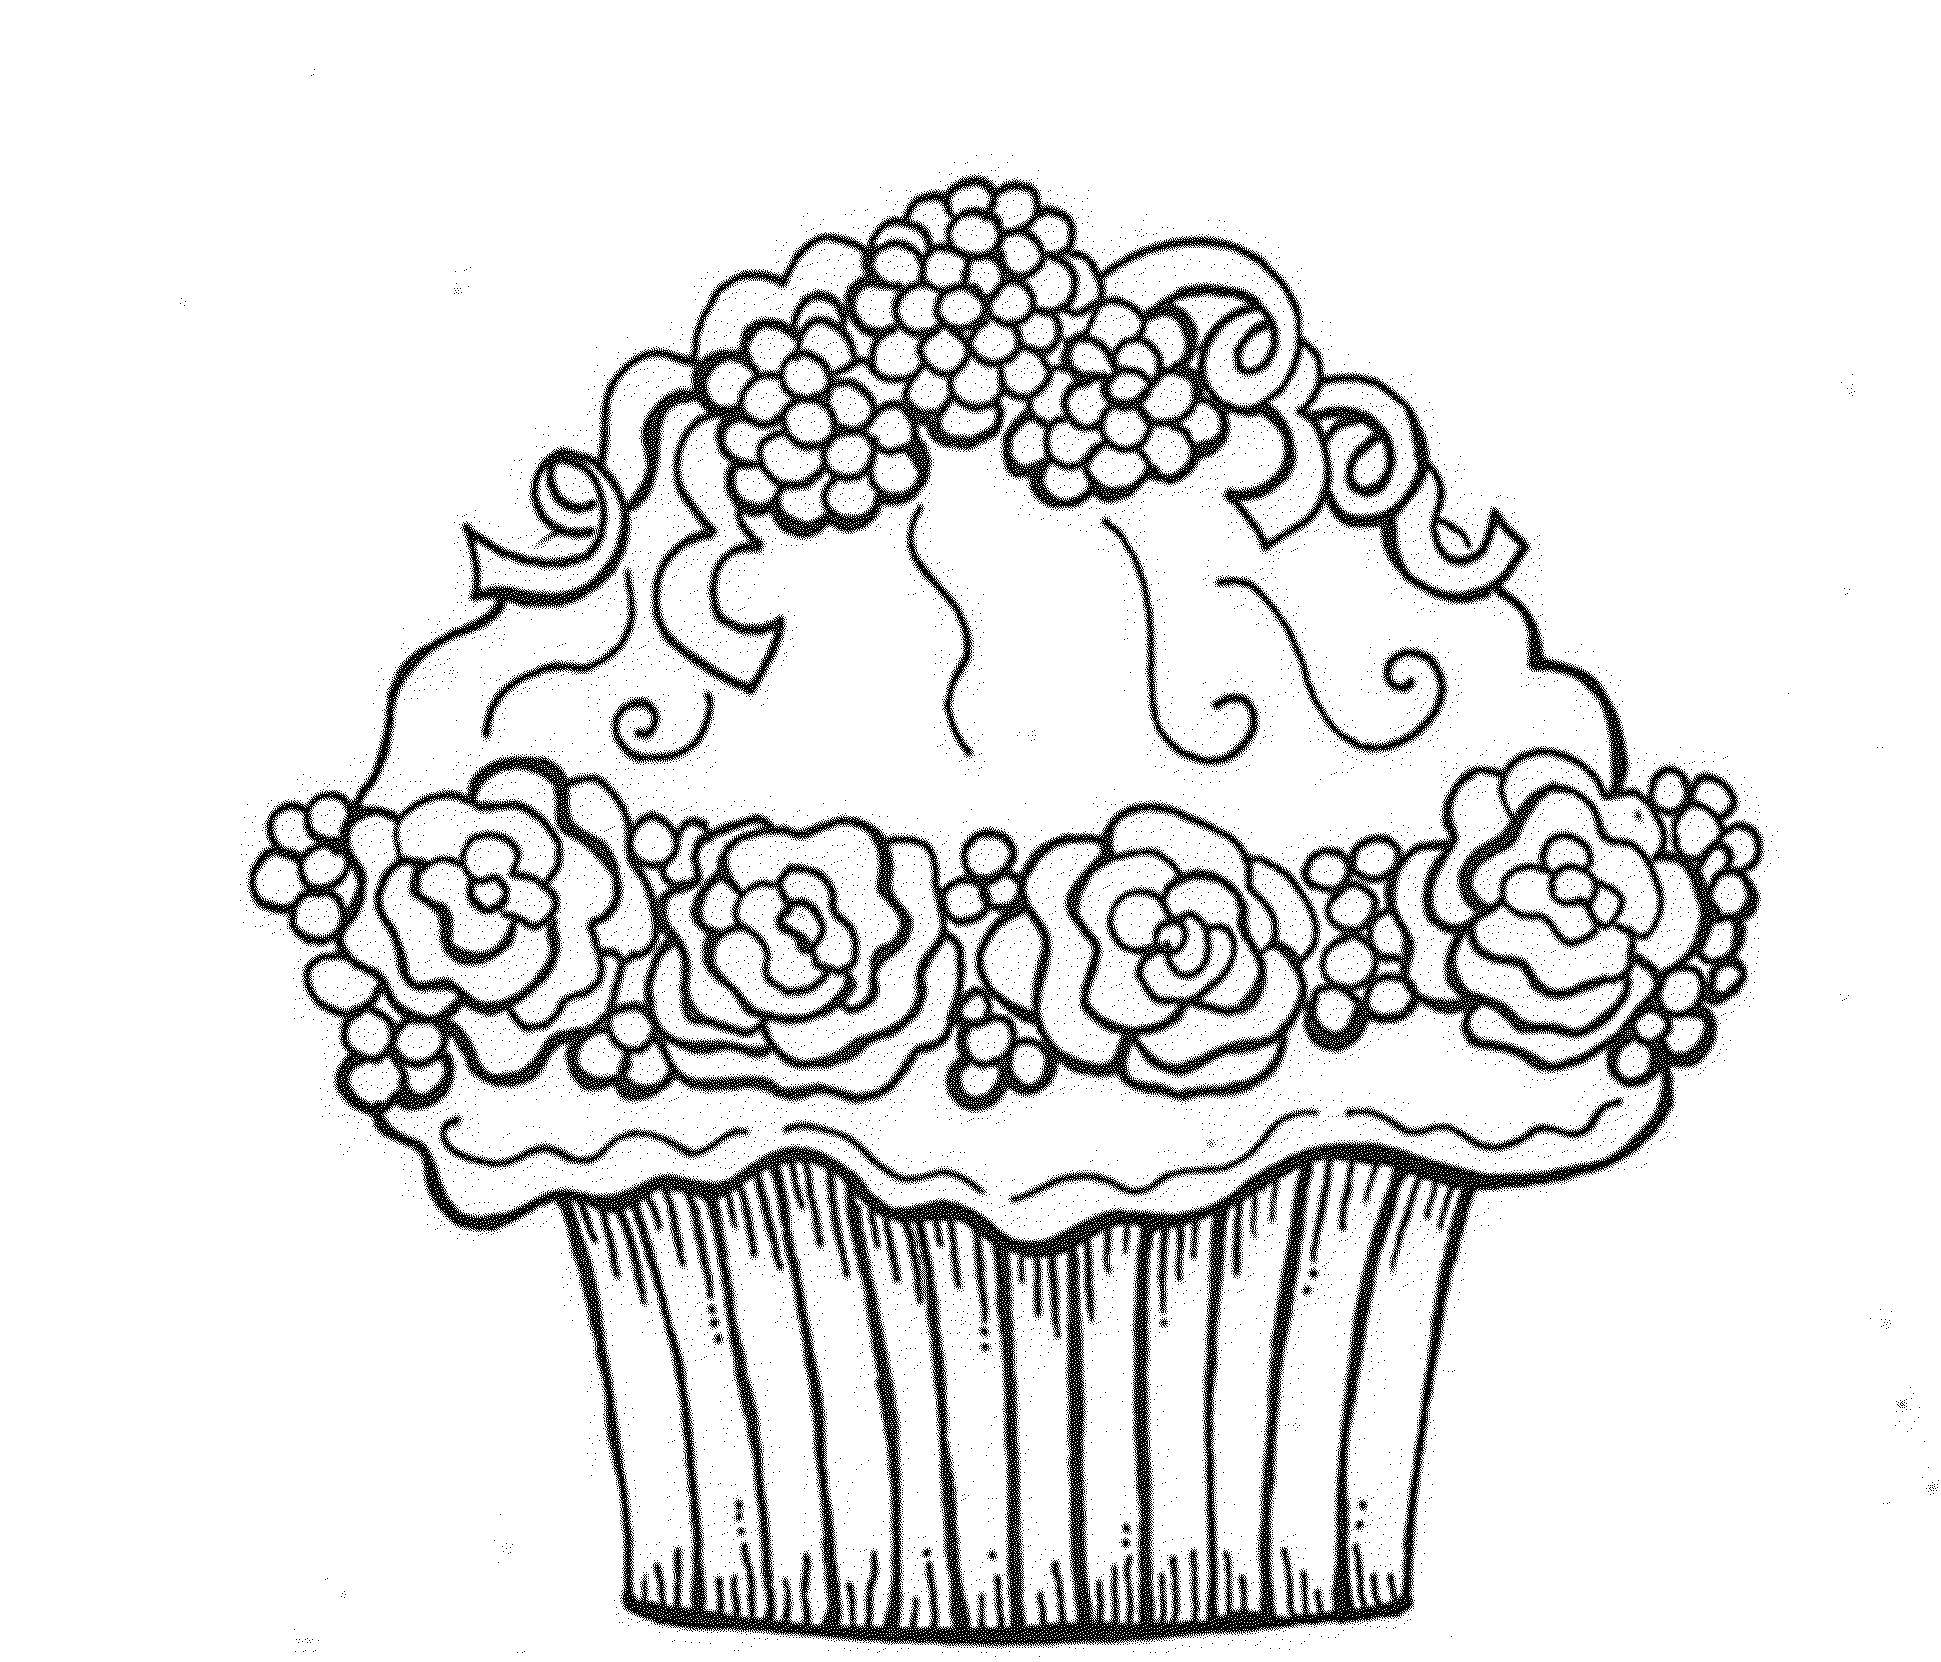 Coloring Chic cupcake. Category cakes. Tags:  Cake, food, holiday.